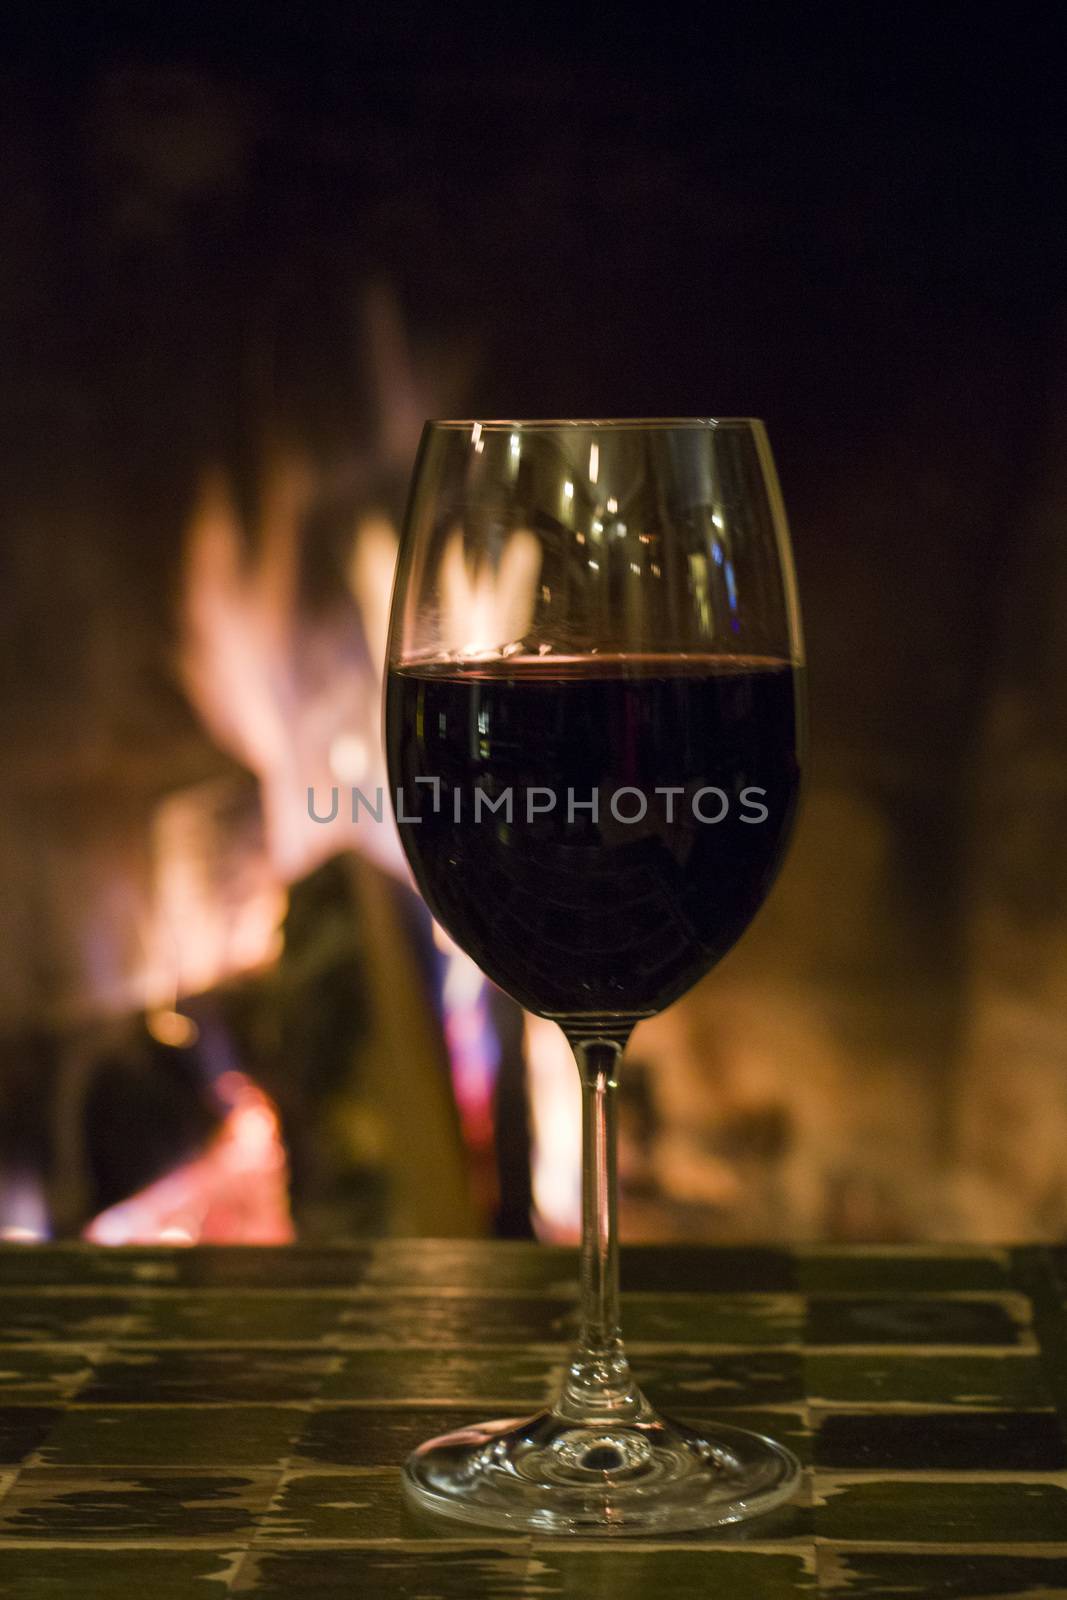 Full wine glass on the table and fireplace background in the bar